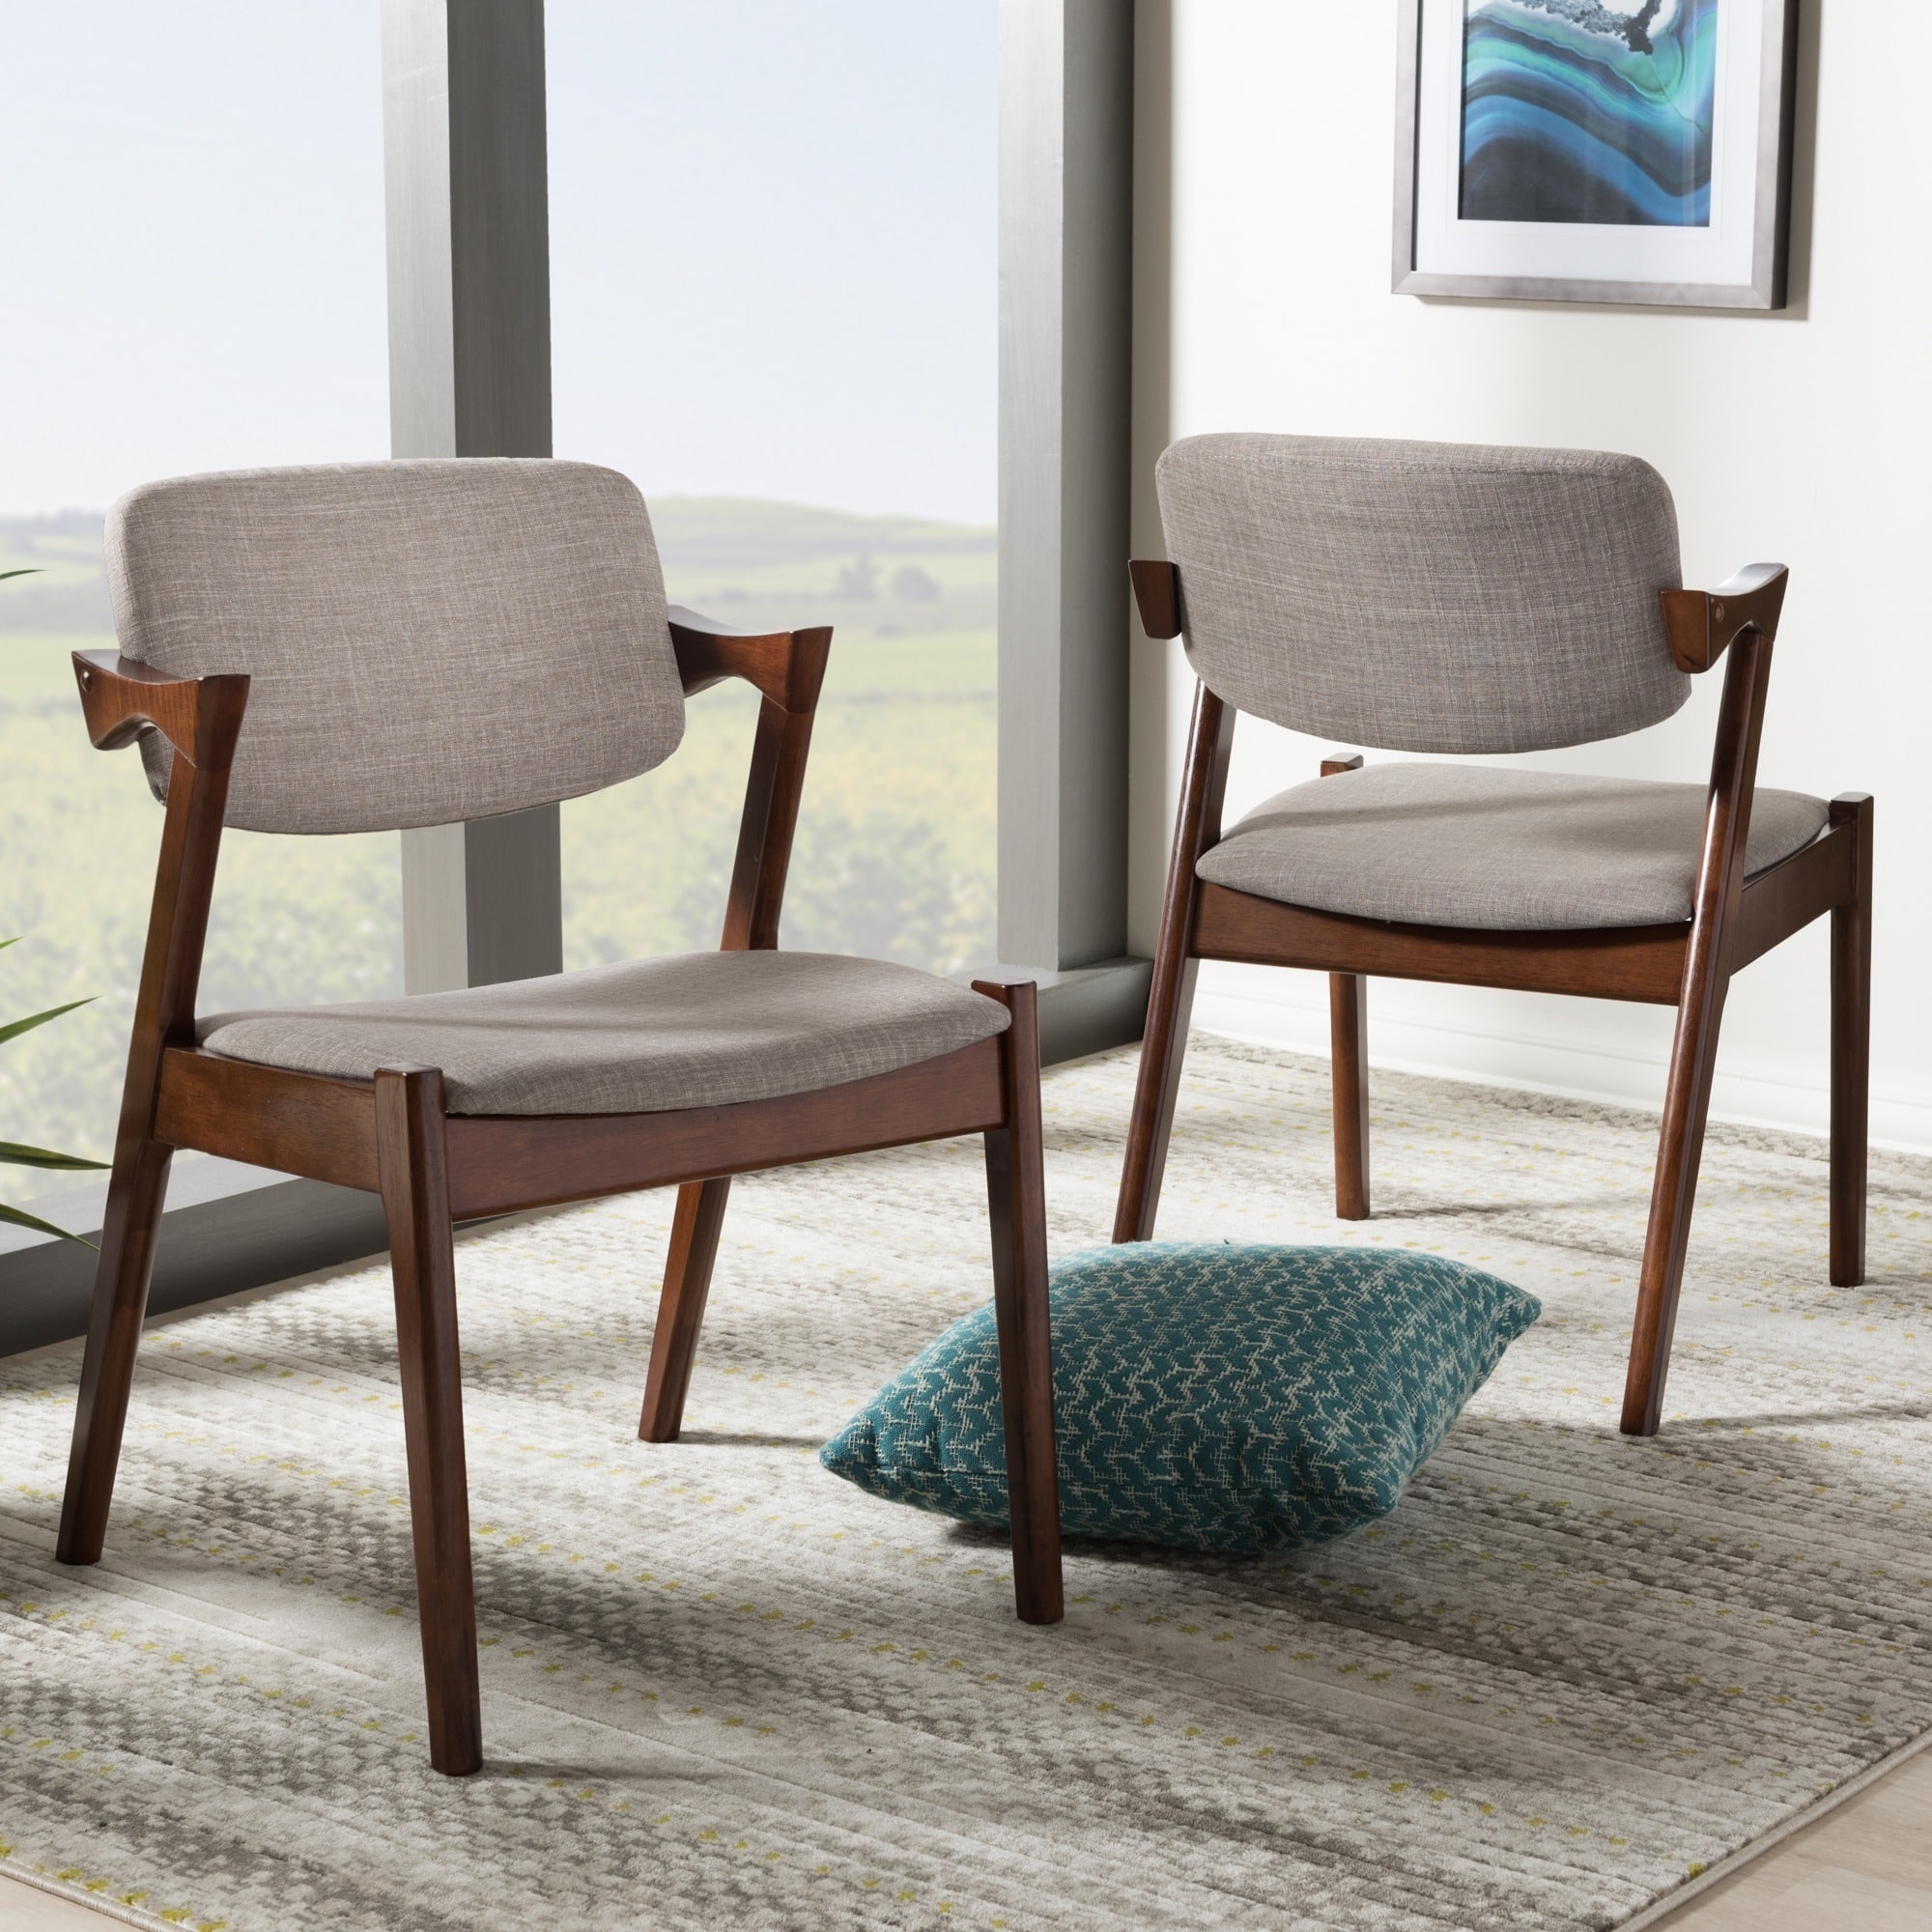 Buy Kitchen & Dining Room Chairs Online at Overstock | Our Best Dining